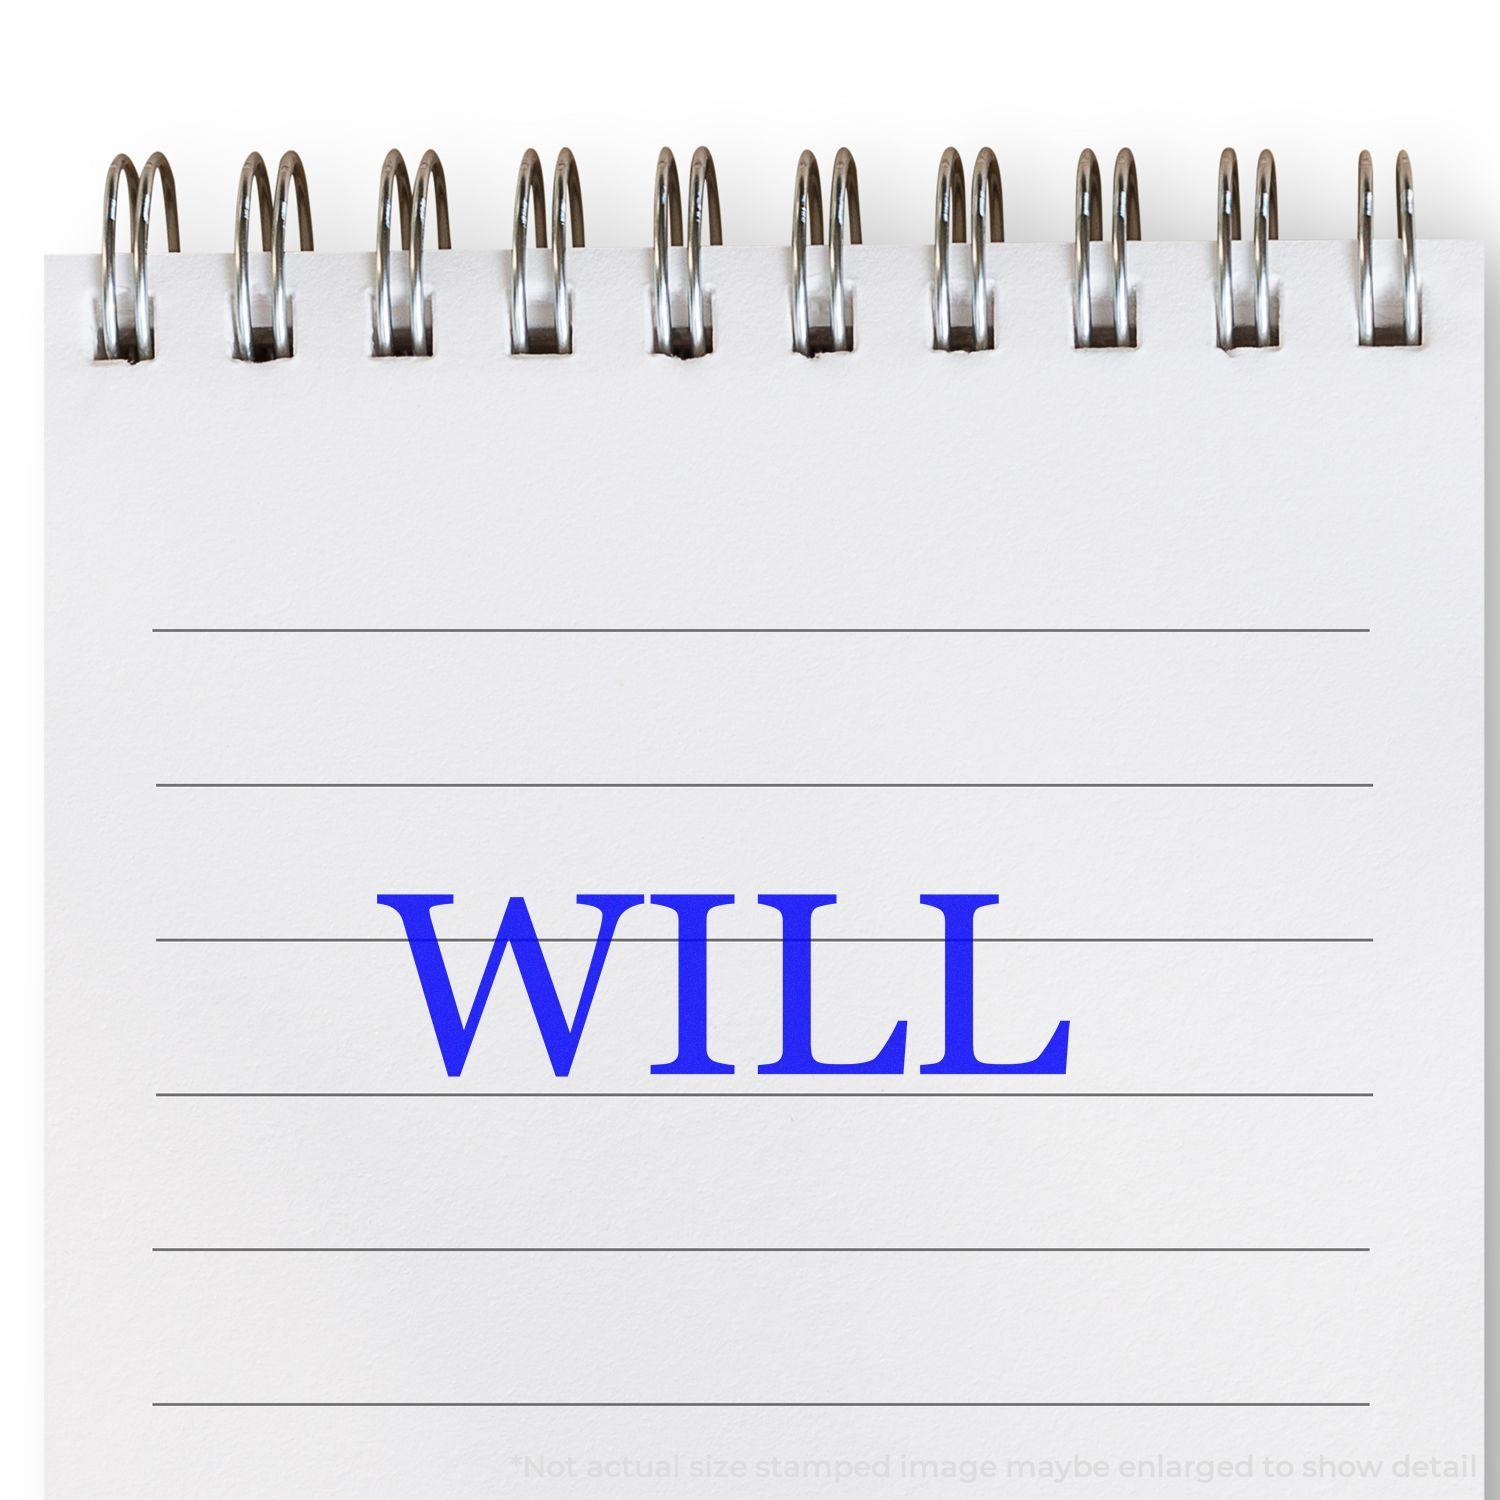 A stock office rubber stamp with a stamped image showing how the text "WILL" in a large font is displayed after stamping.